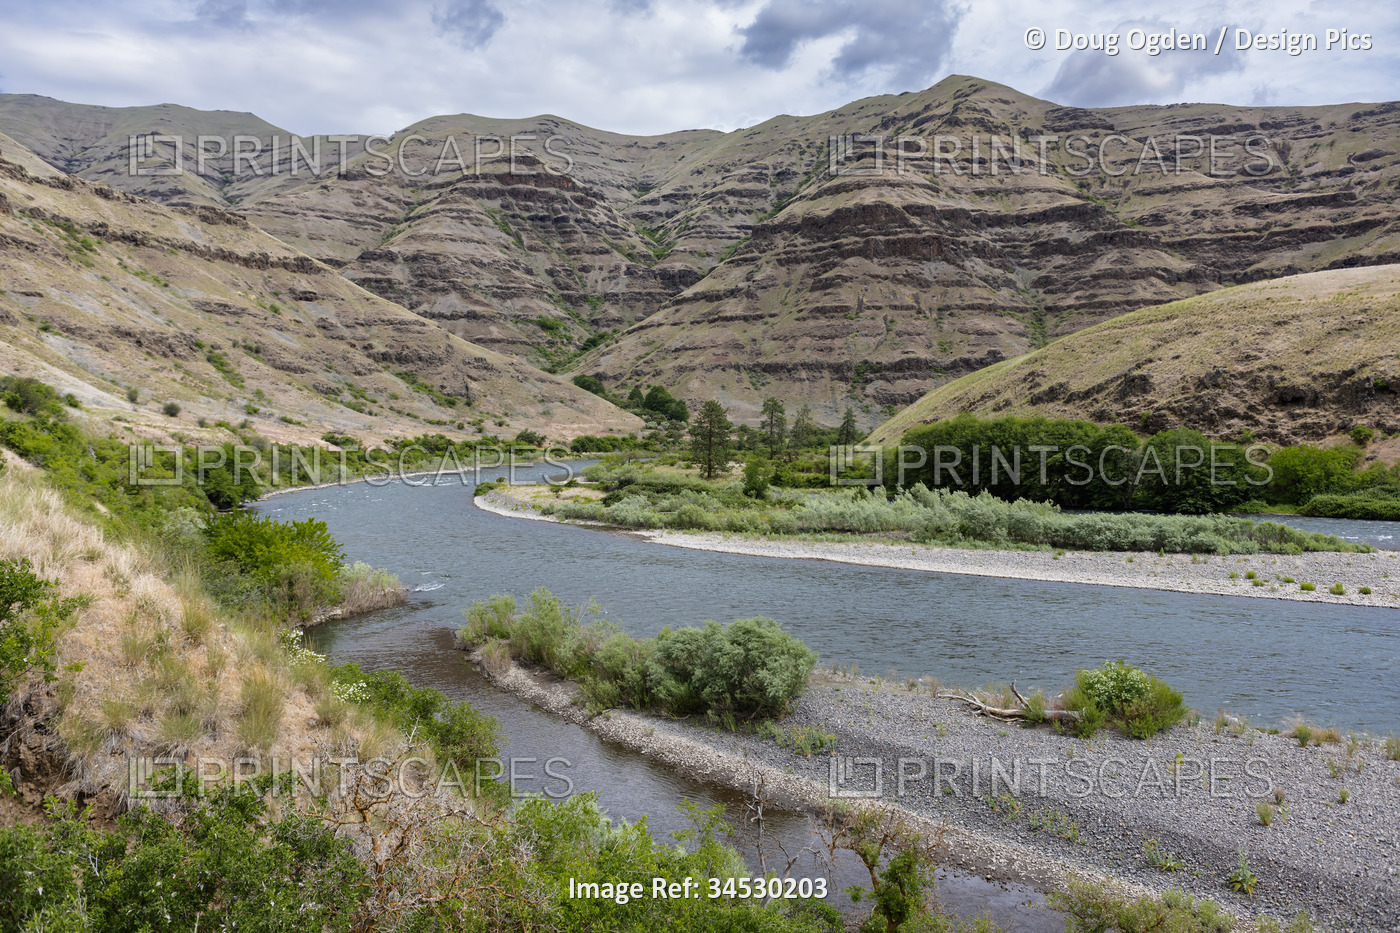 Gravel bars of the wild Snake River and the exposed geologic and eroding cliffs ...